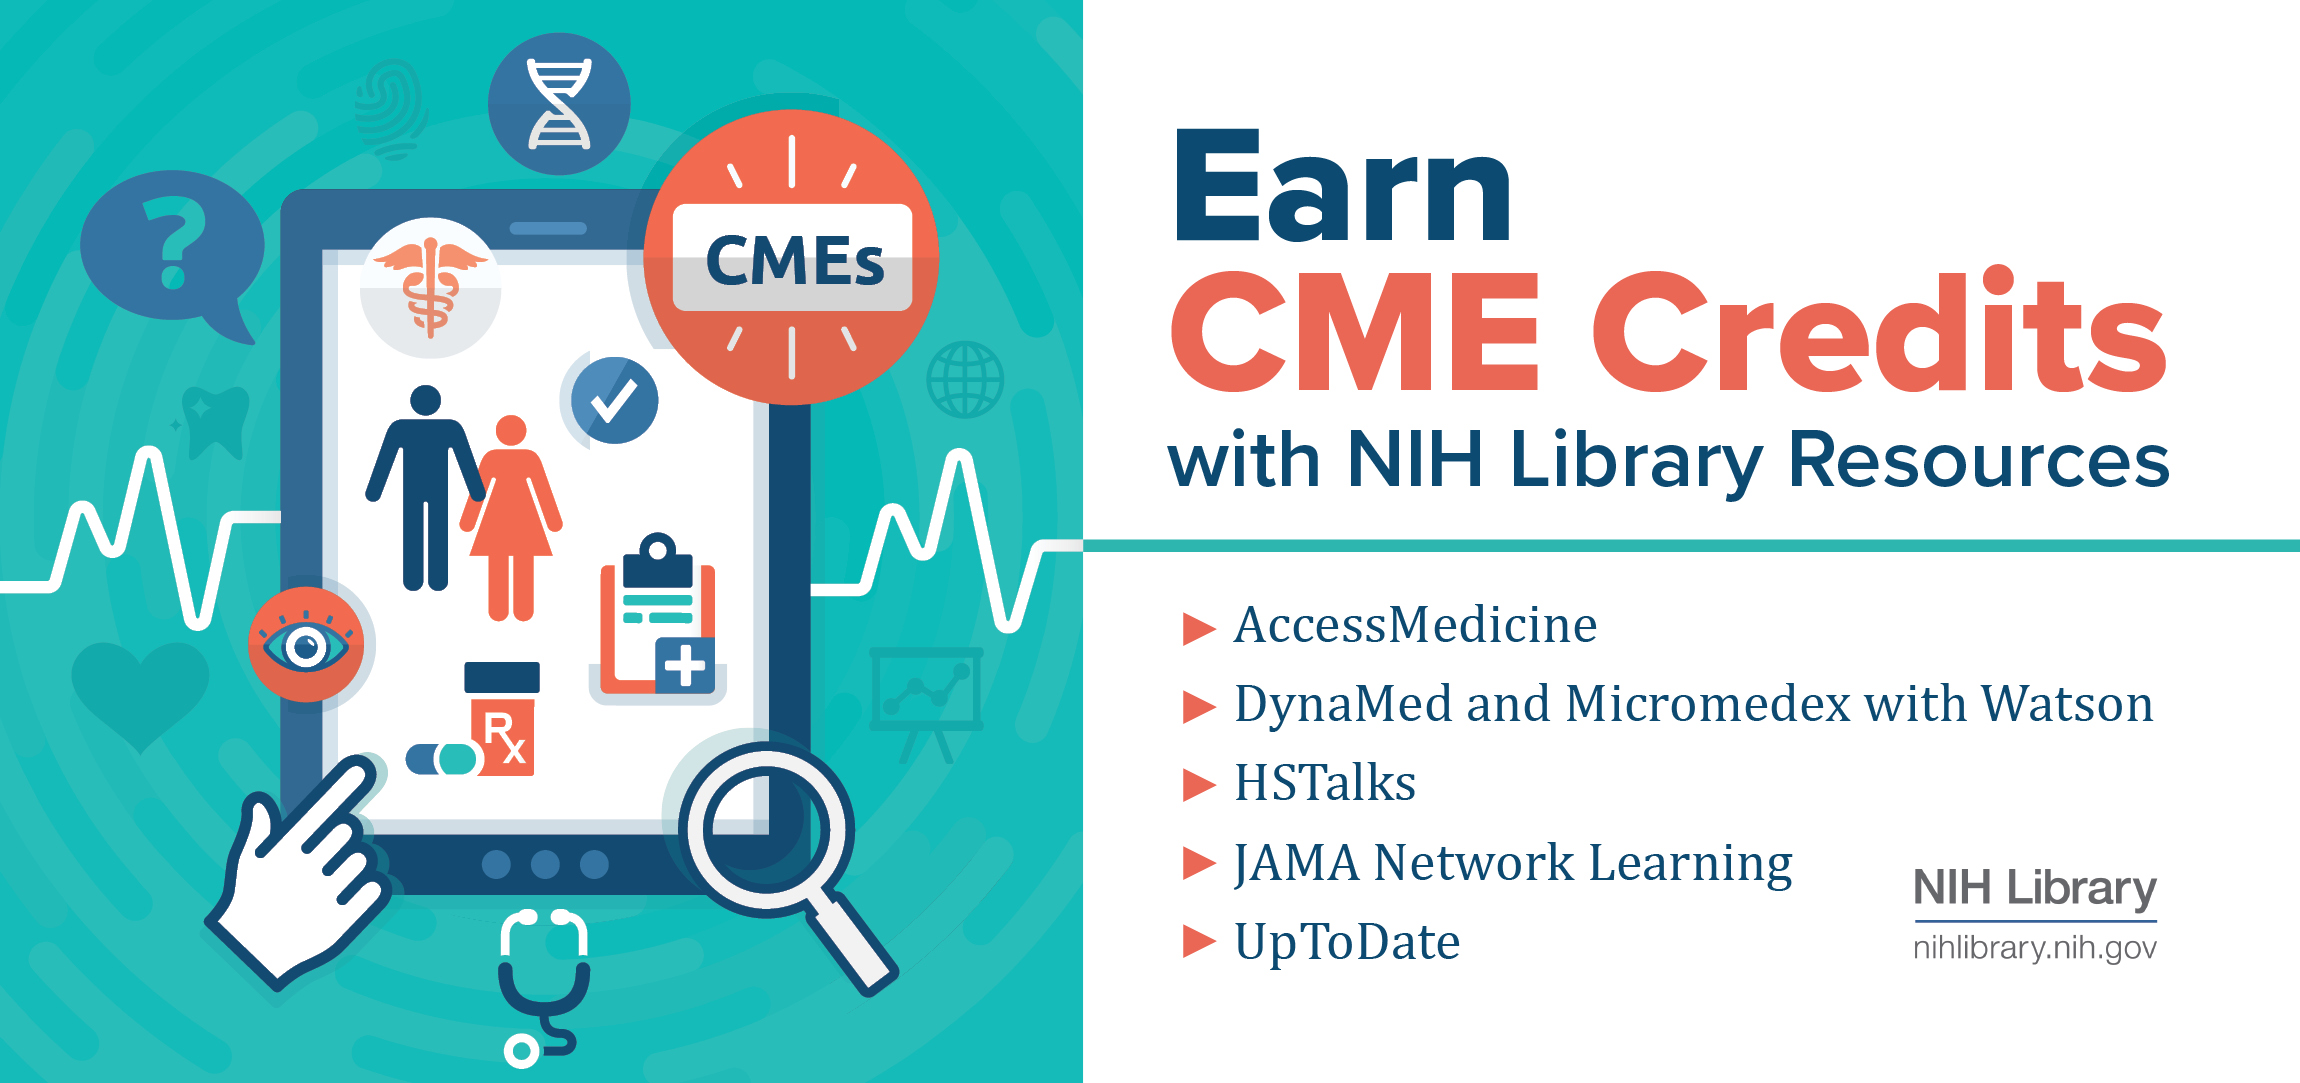 ORS News2Use - Earn Continuing Medical Education (CME) Credits